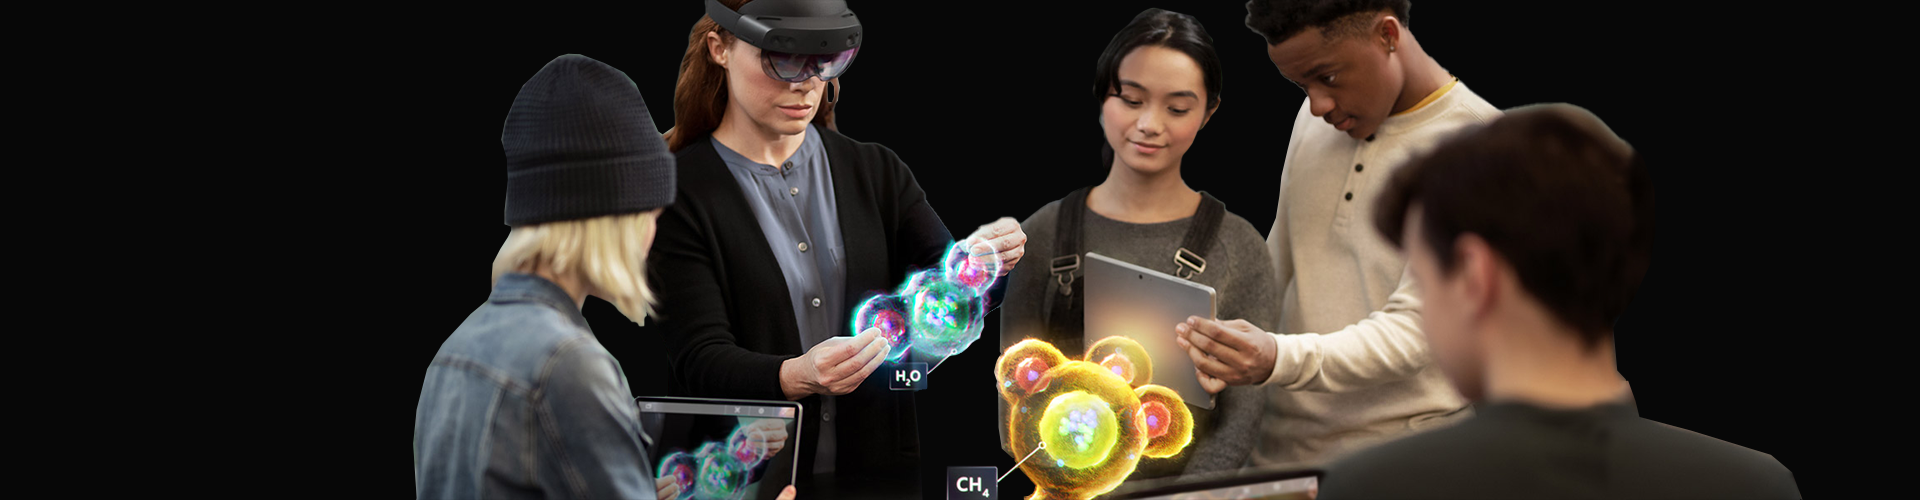 mixed reality business solutions